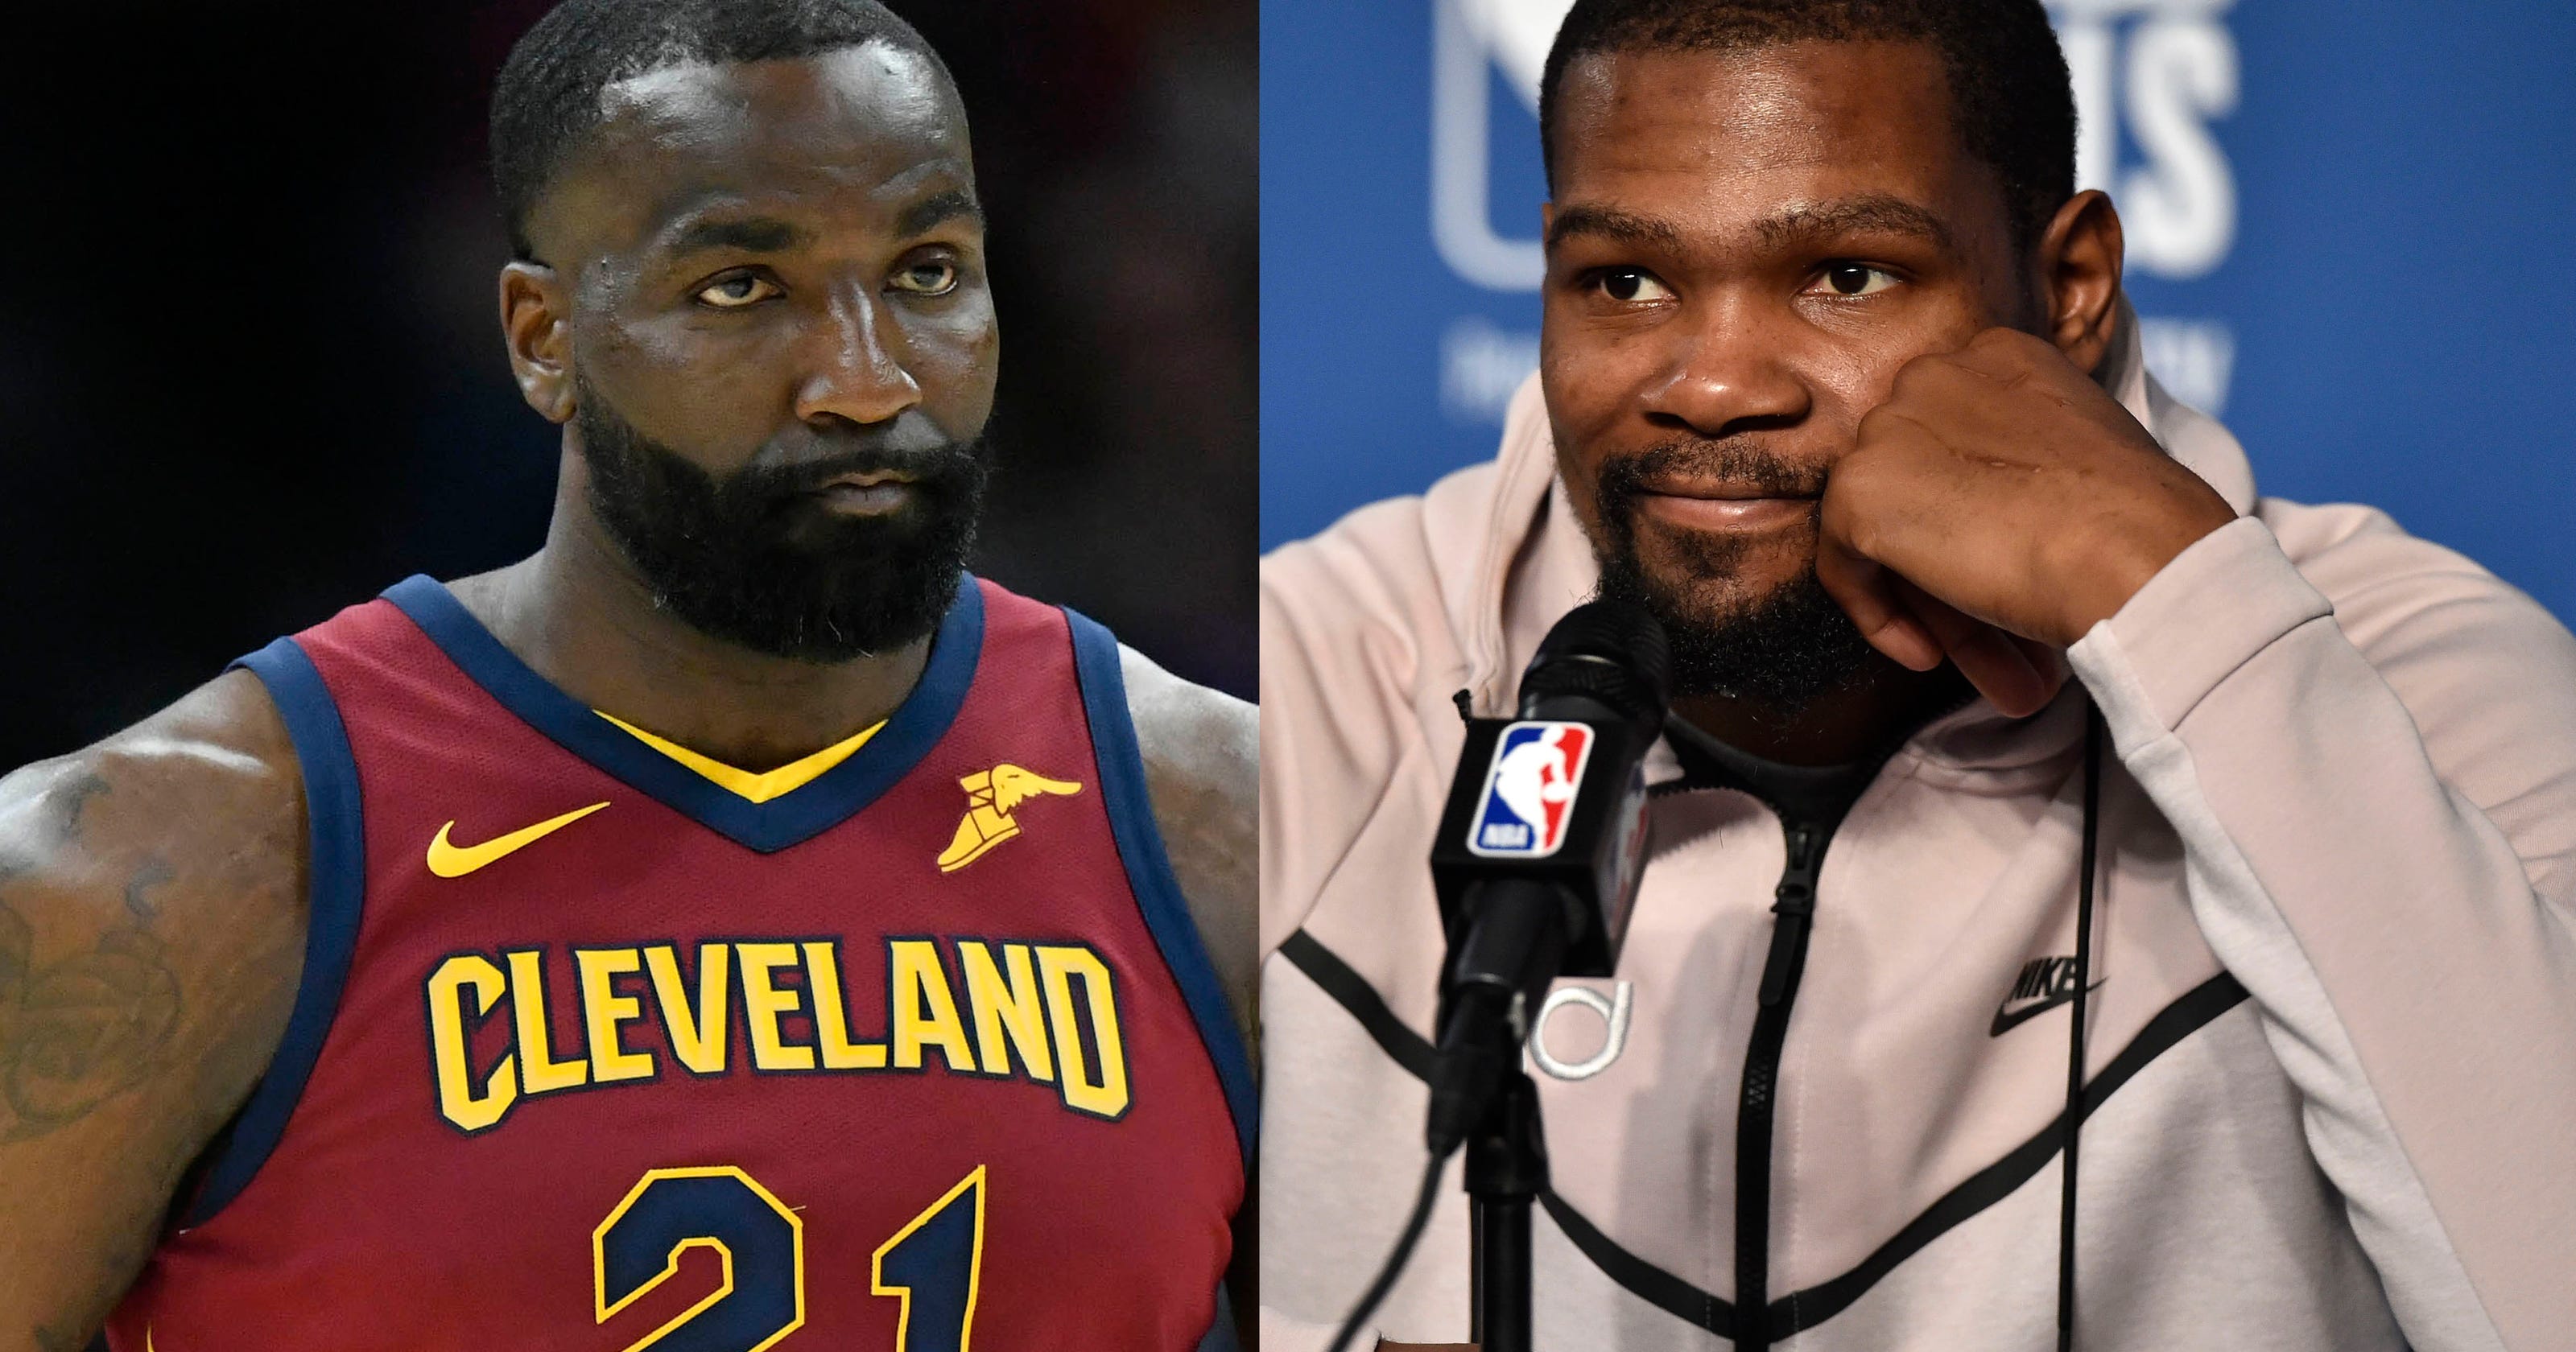 Kendrick Perkins flipped off Kevin Durant during Game 3 presser